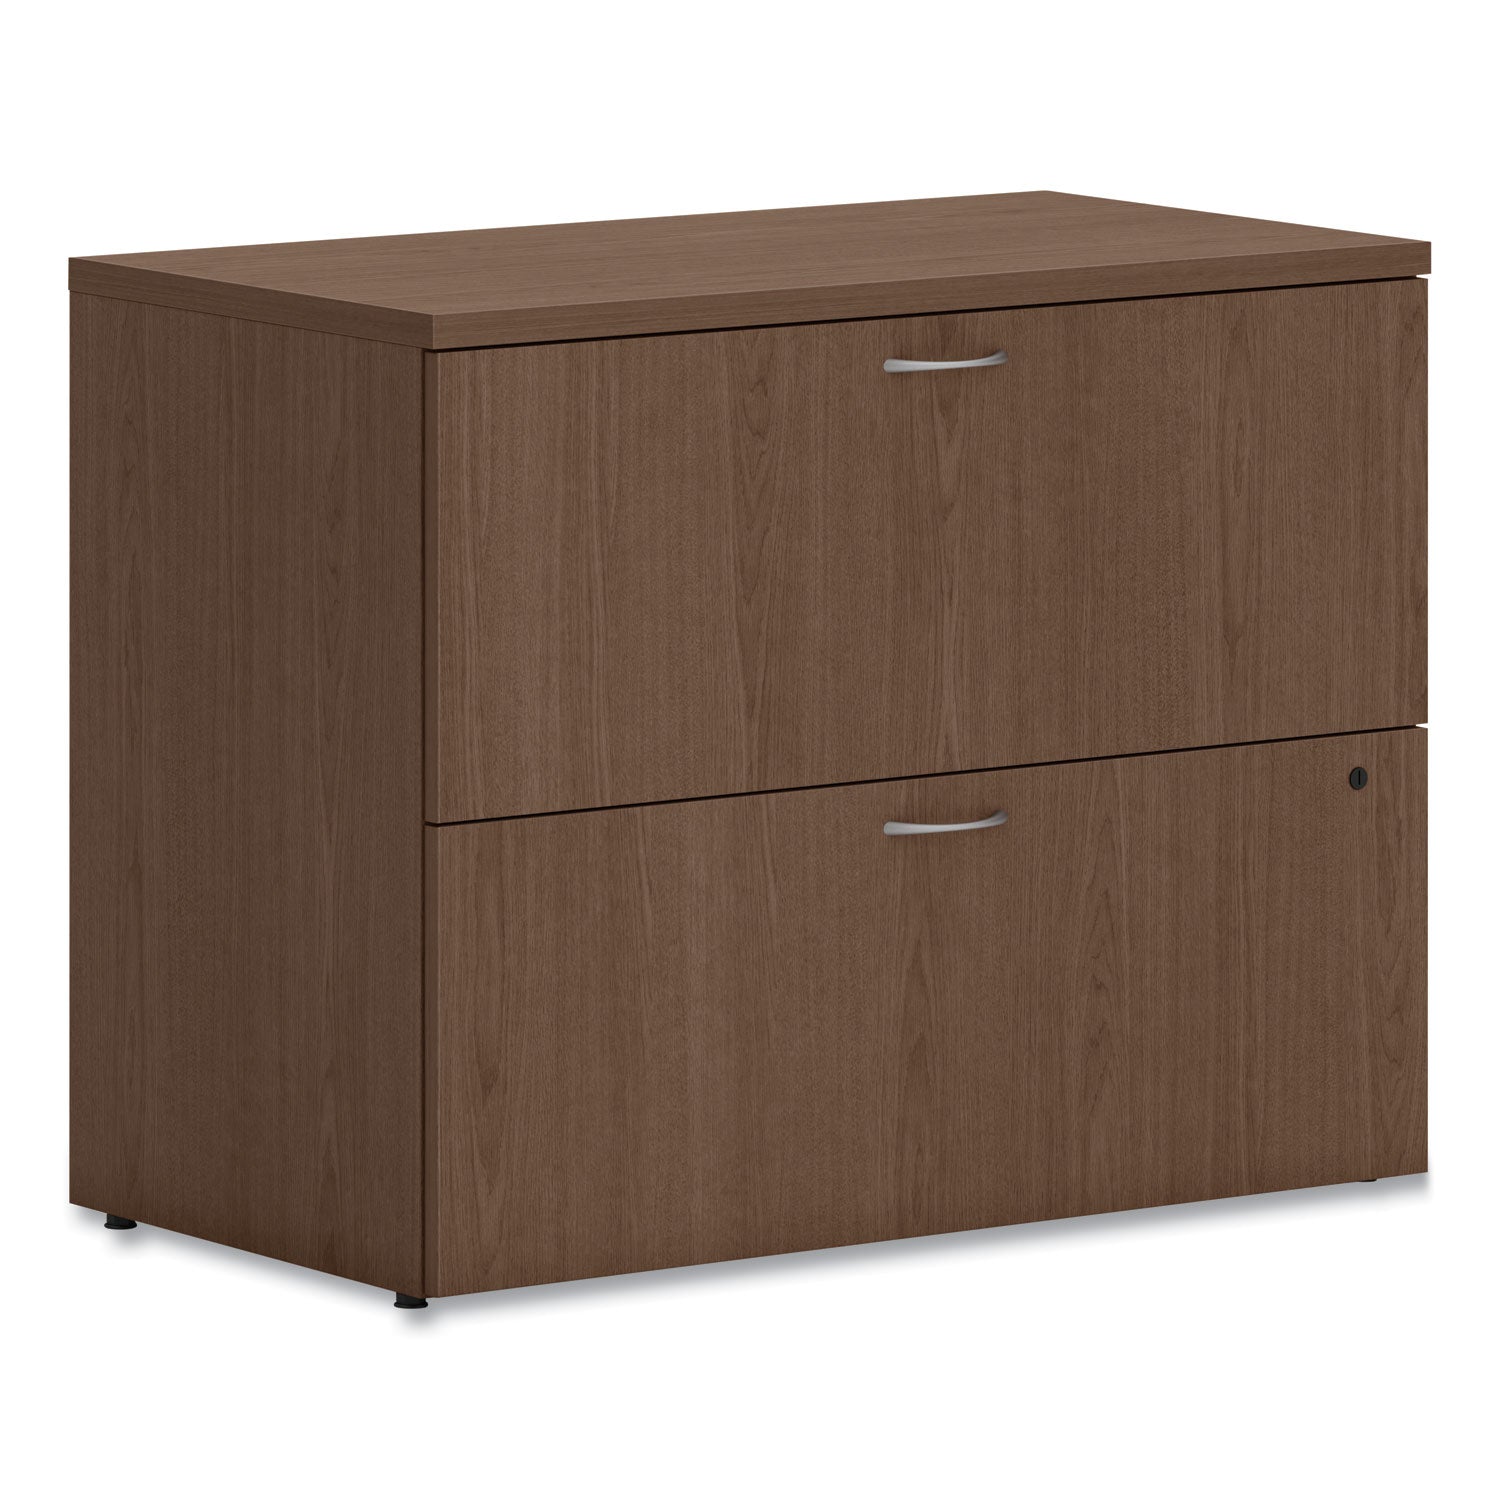 mod-lateral-file-2-legal-letter-size-file-drawers-sepia-walnut-36-x-20-x-29_honllf3620l2le1 - 1